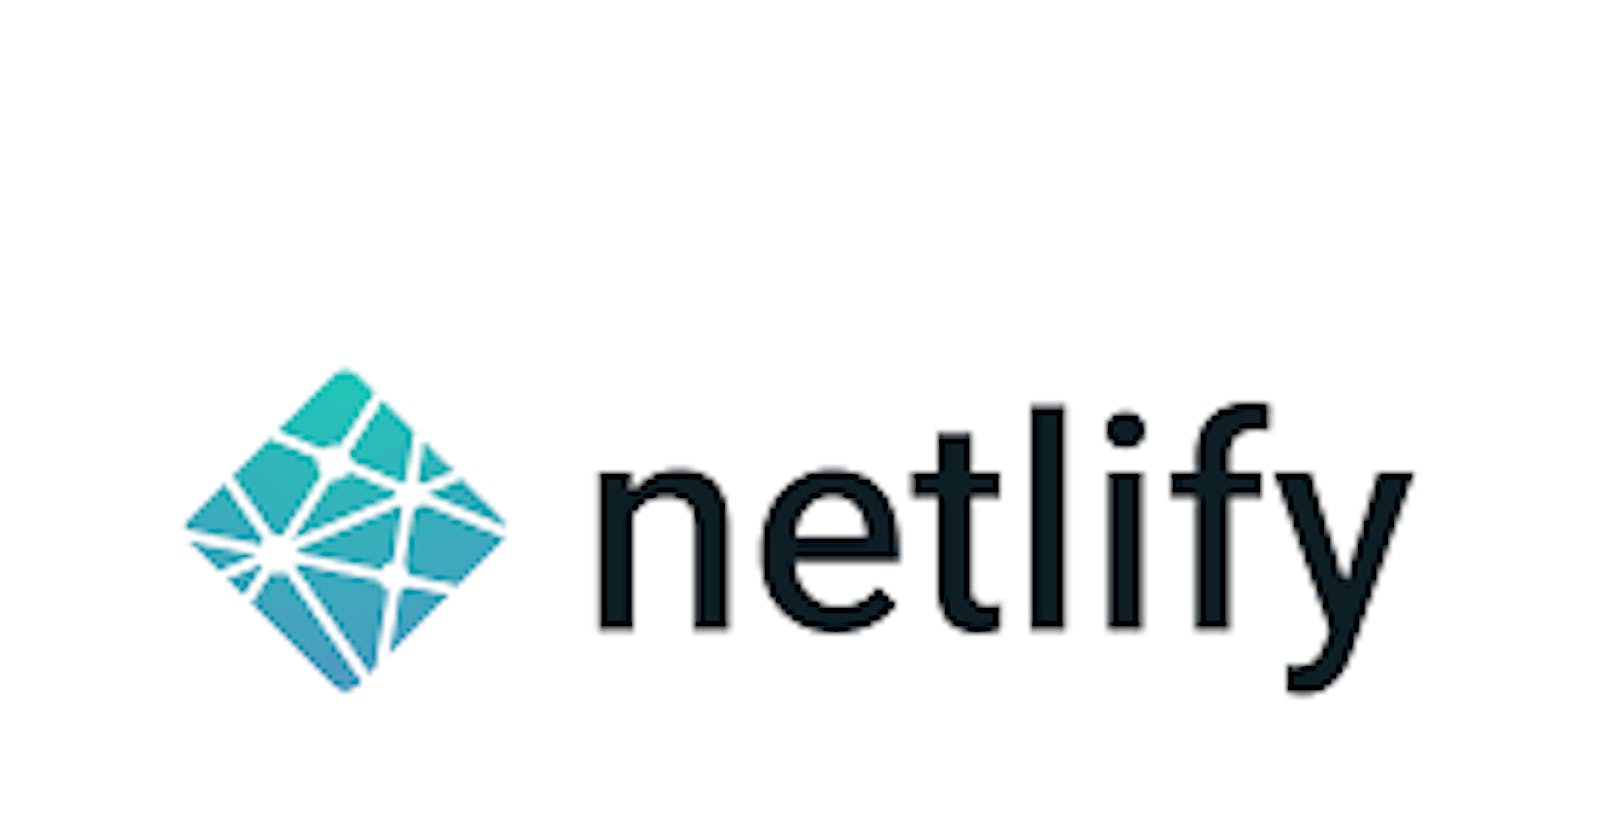 Netlify continuous deployment